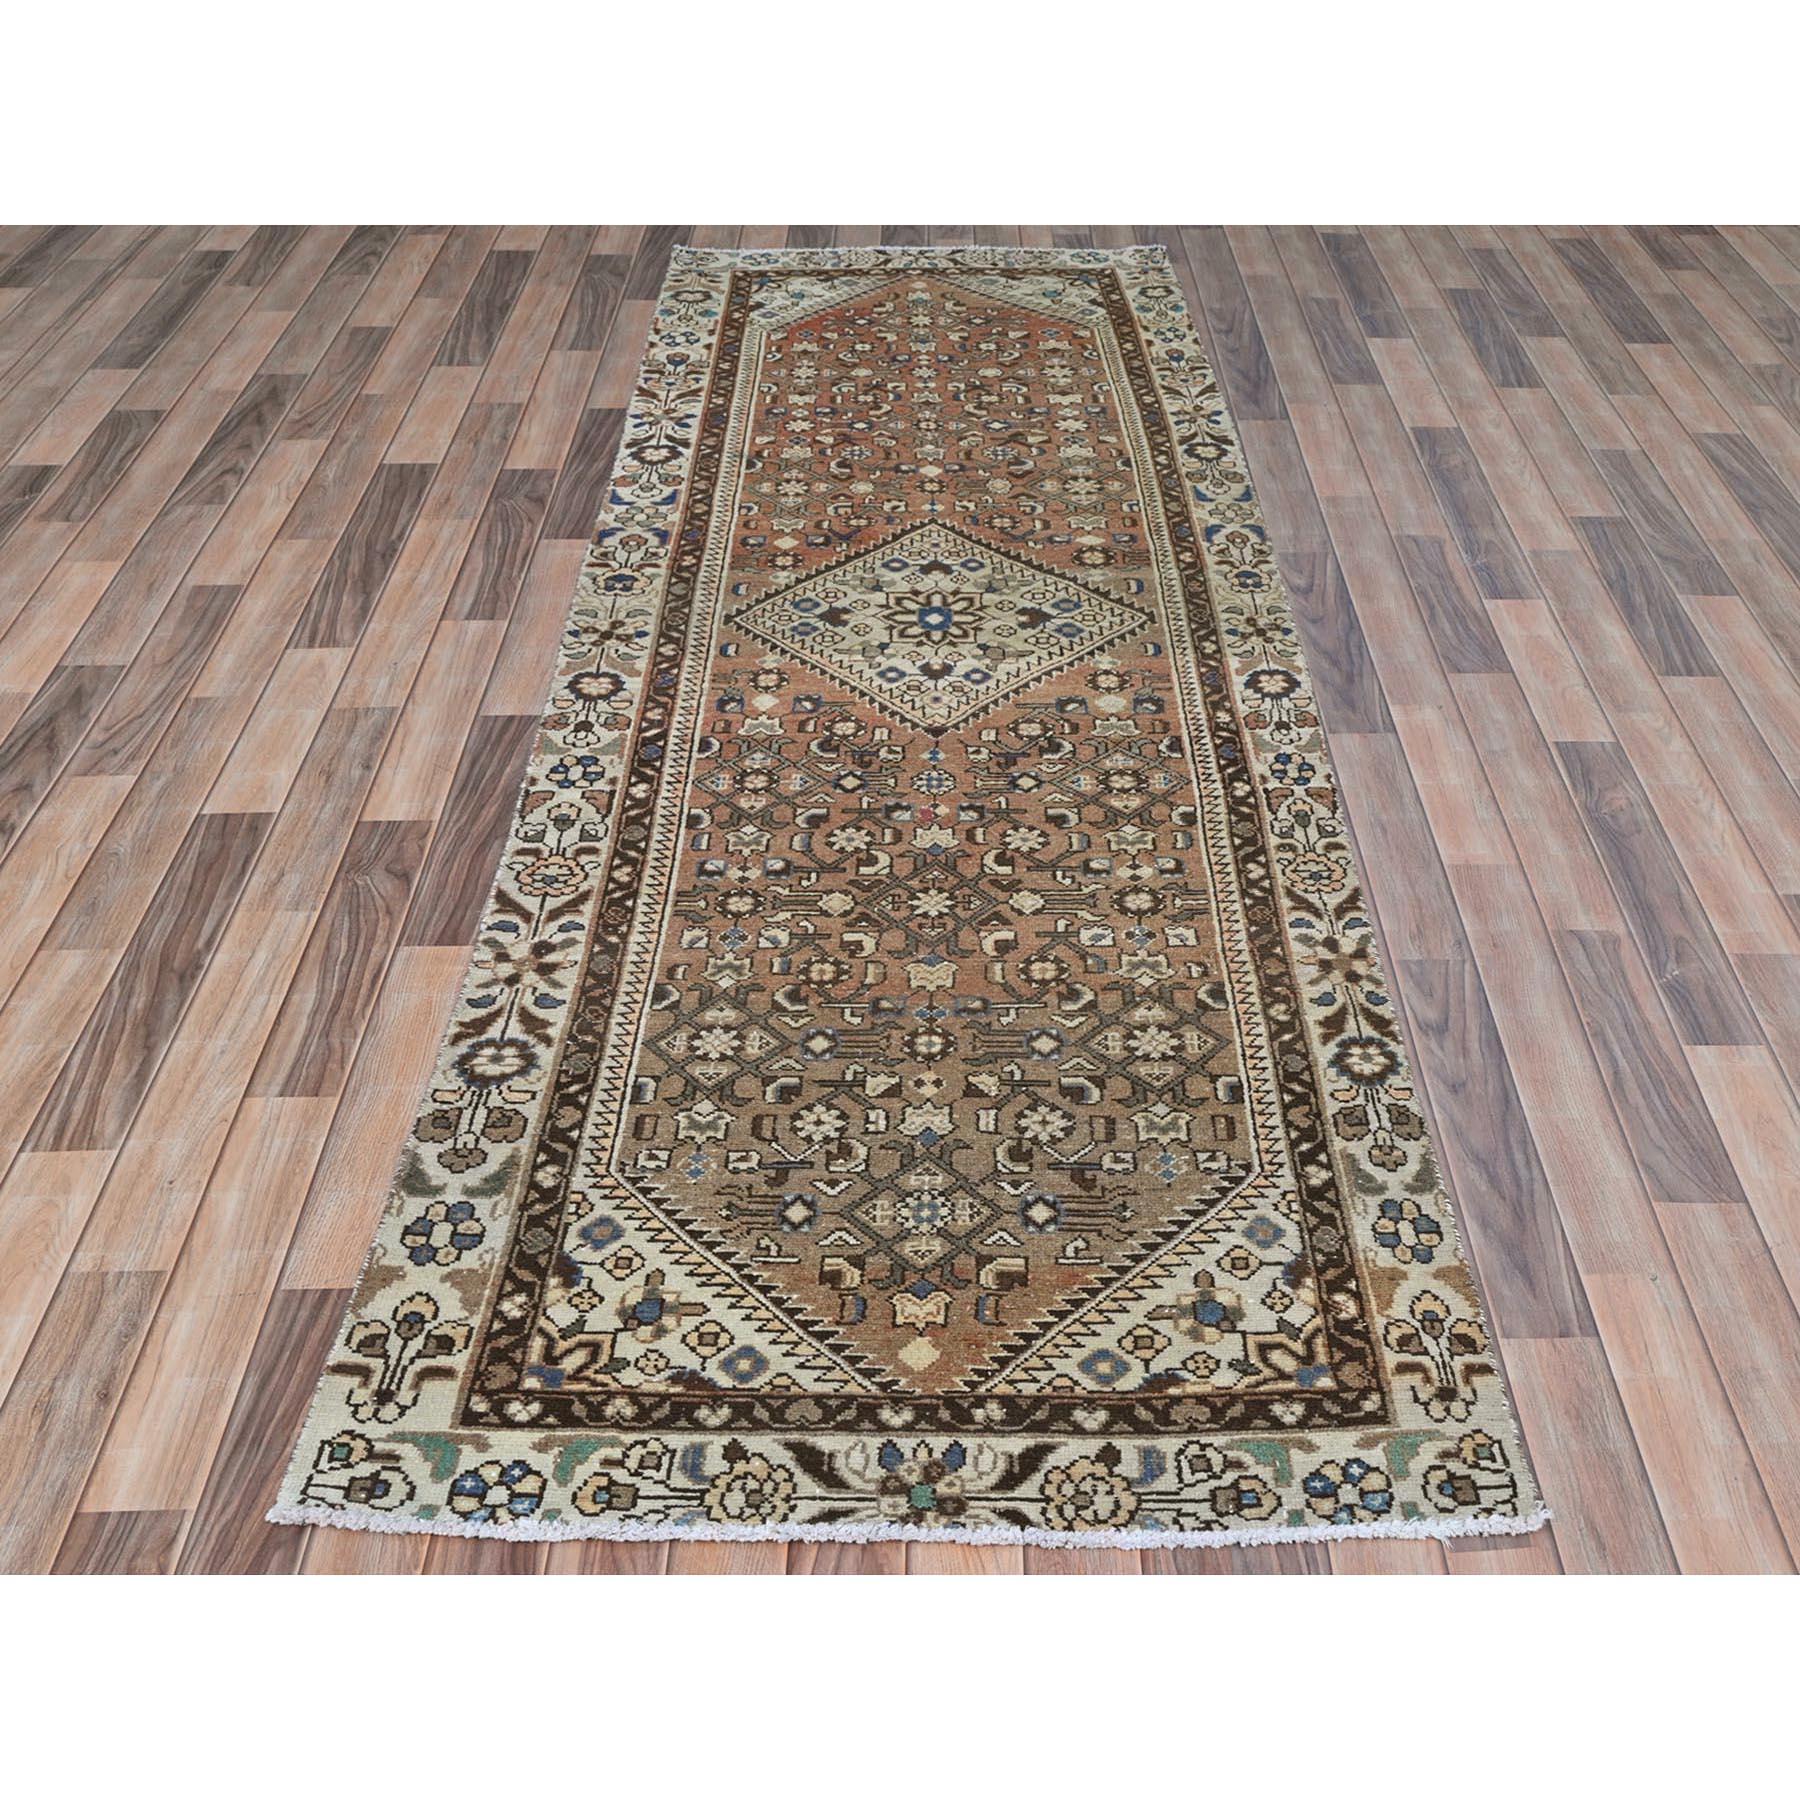 This fabulous Hand-Knotted carpet has been created and designed for extra strength and durability. This rug has been handcrafted for weeks in the traditional method that is used to make
Exact rug size in feet and inches : 3'4